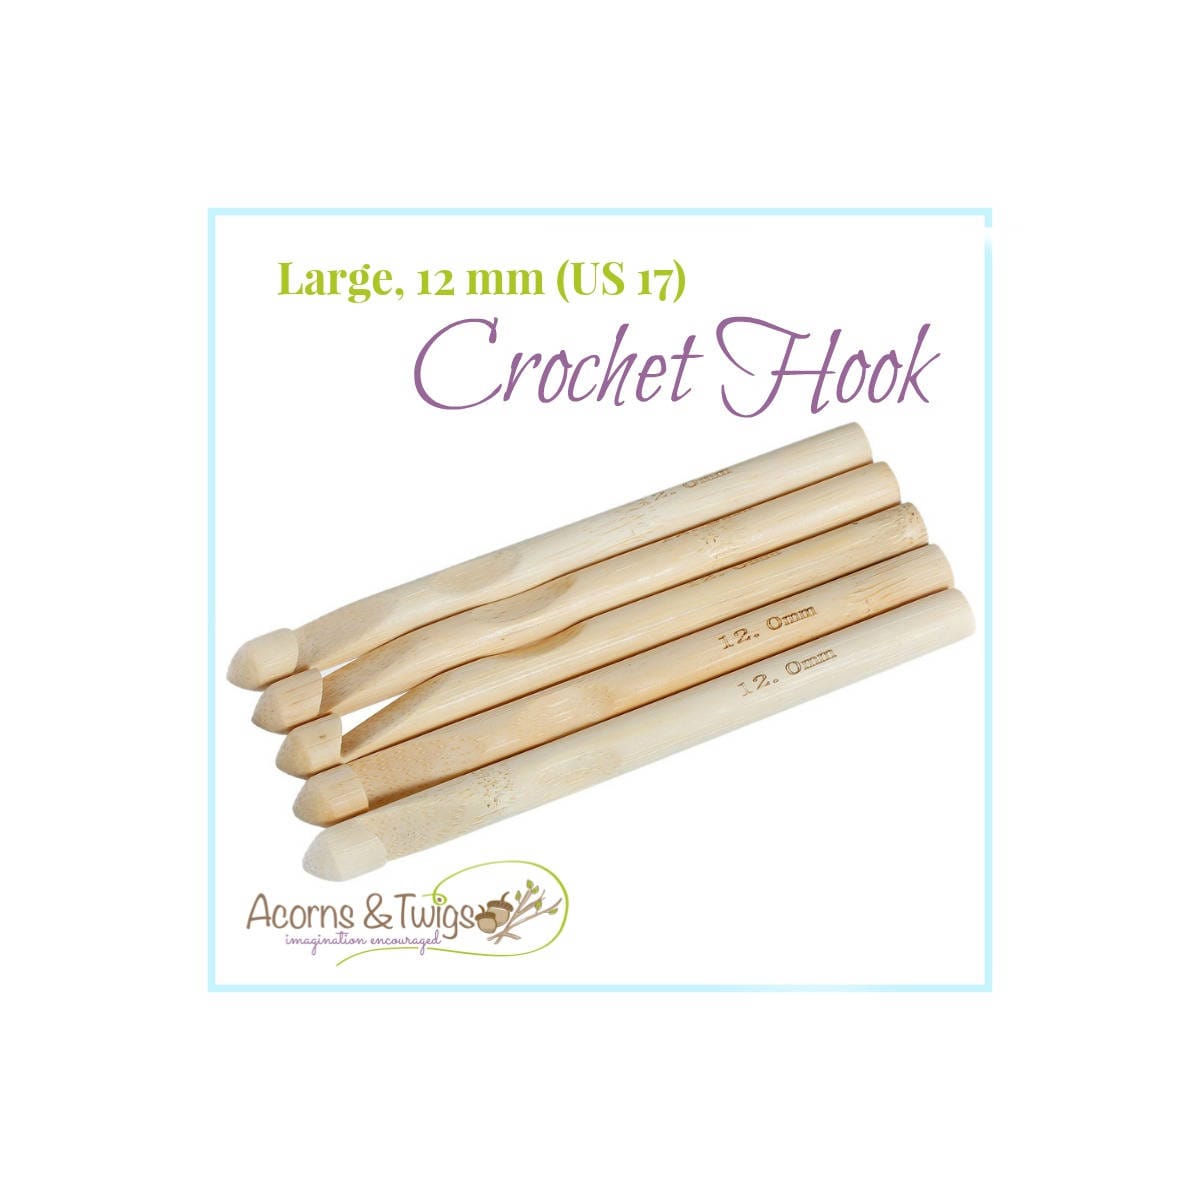 Buy Wholesale China One/two/three Heads Bamboo Handle Crochet Hook